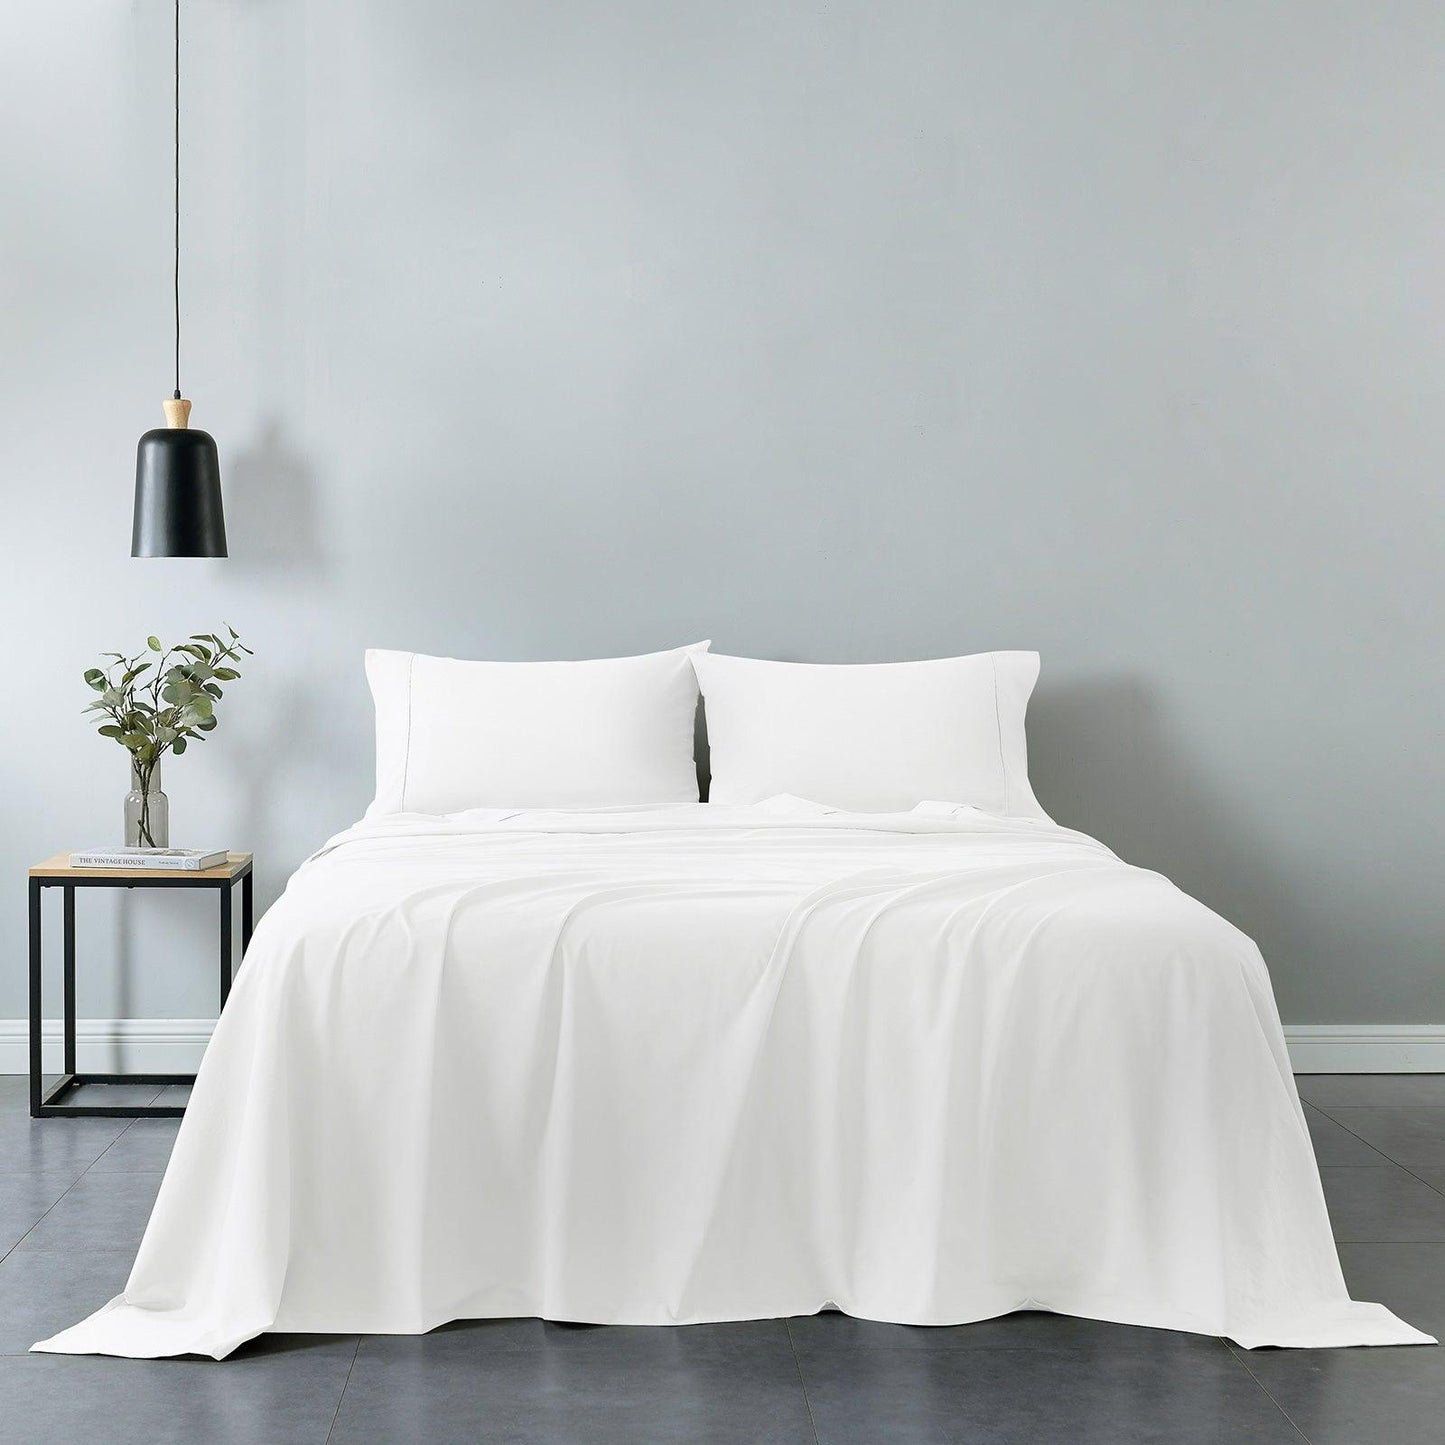 Royal Comfort Vintage Washed 100% Cotton Sheet Set Fitted Flat Sheet Pillowcases - Queen - White